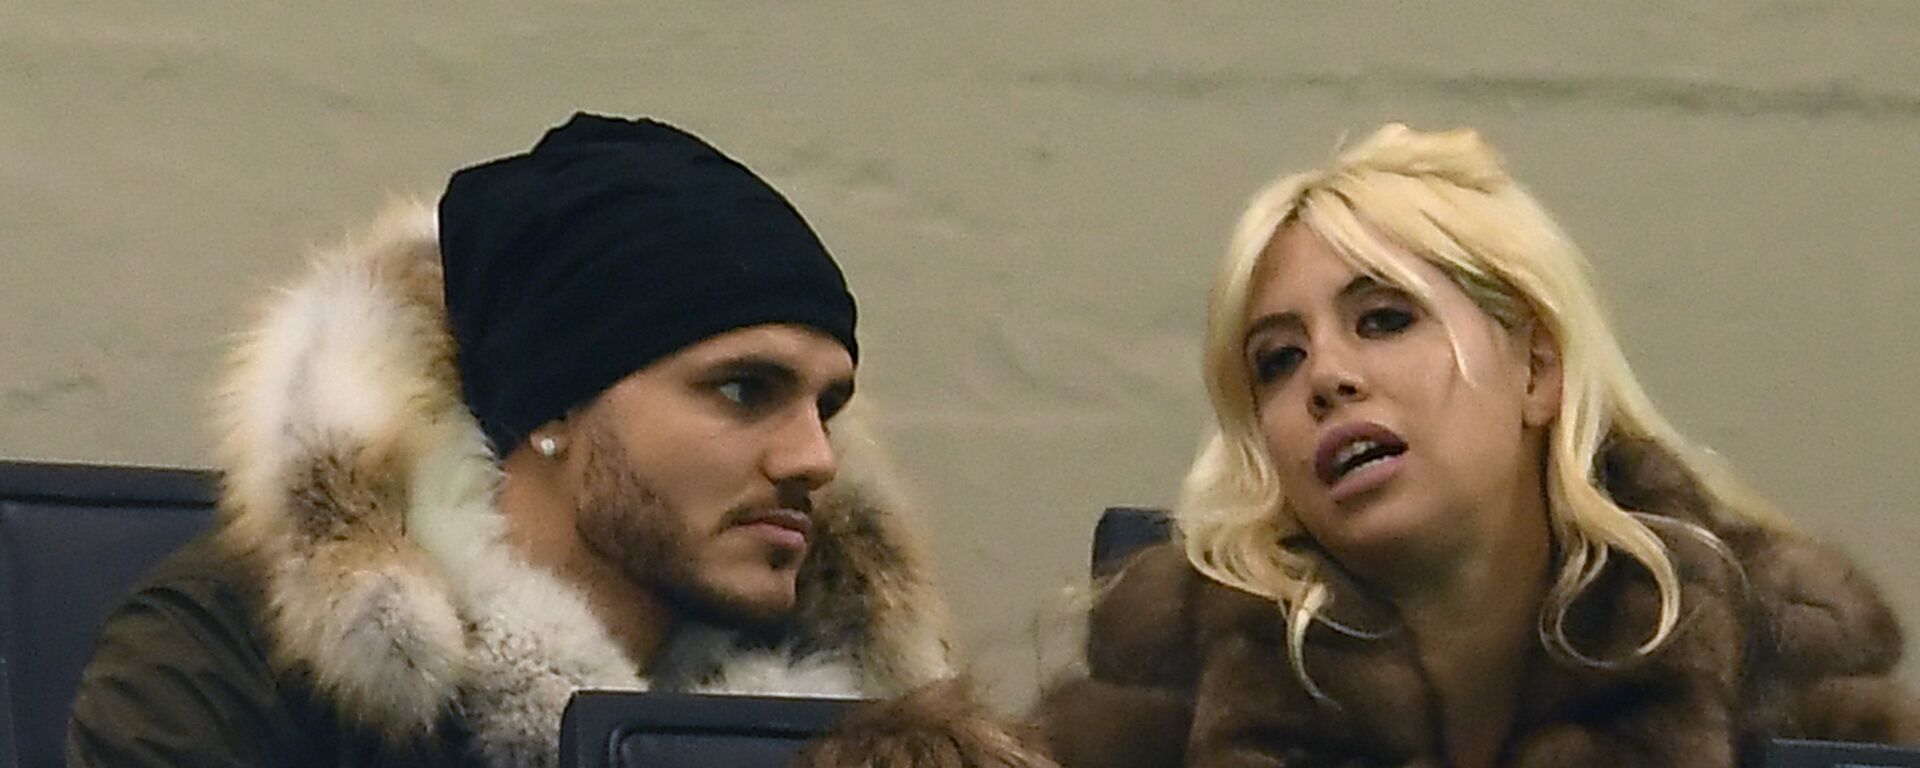 Inter Milan's Argentinian forward Mauro Emanuel Icardi (L) and his wife Wanda Nara look on during the Italian Serie A football match Inter Milan versus Crotone on February 3, 2018 at the 'Giuseppe Meazza' Stadium in Milan.  - اسپوتنیک افغانستان  , 1920, 27.10.2021